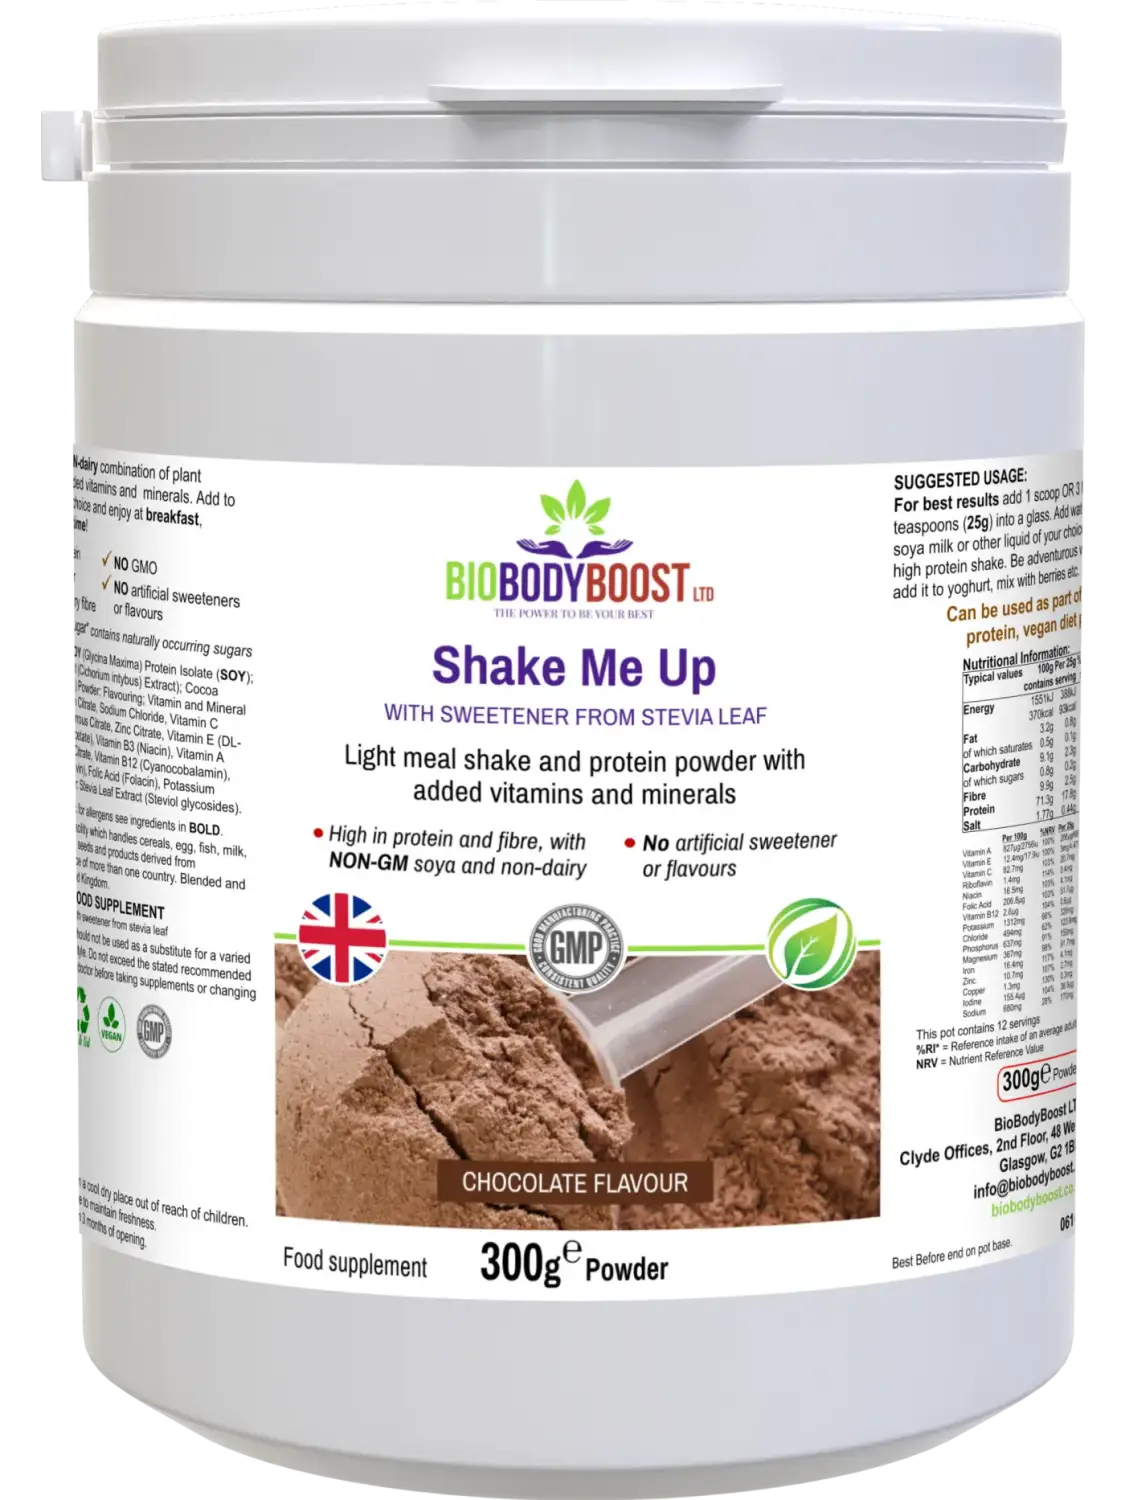 Shake Me Up (Chocolate flavour) - Vegan Protein - Diet Shakes normal energy - yielding metabolism